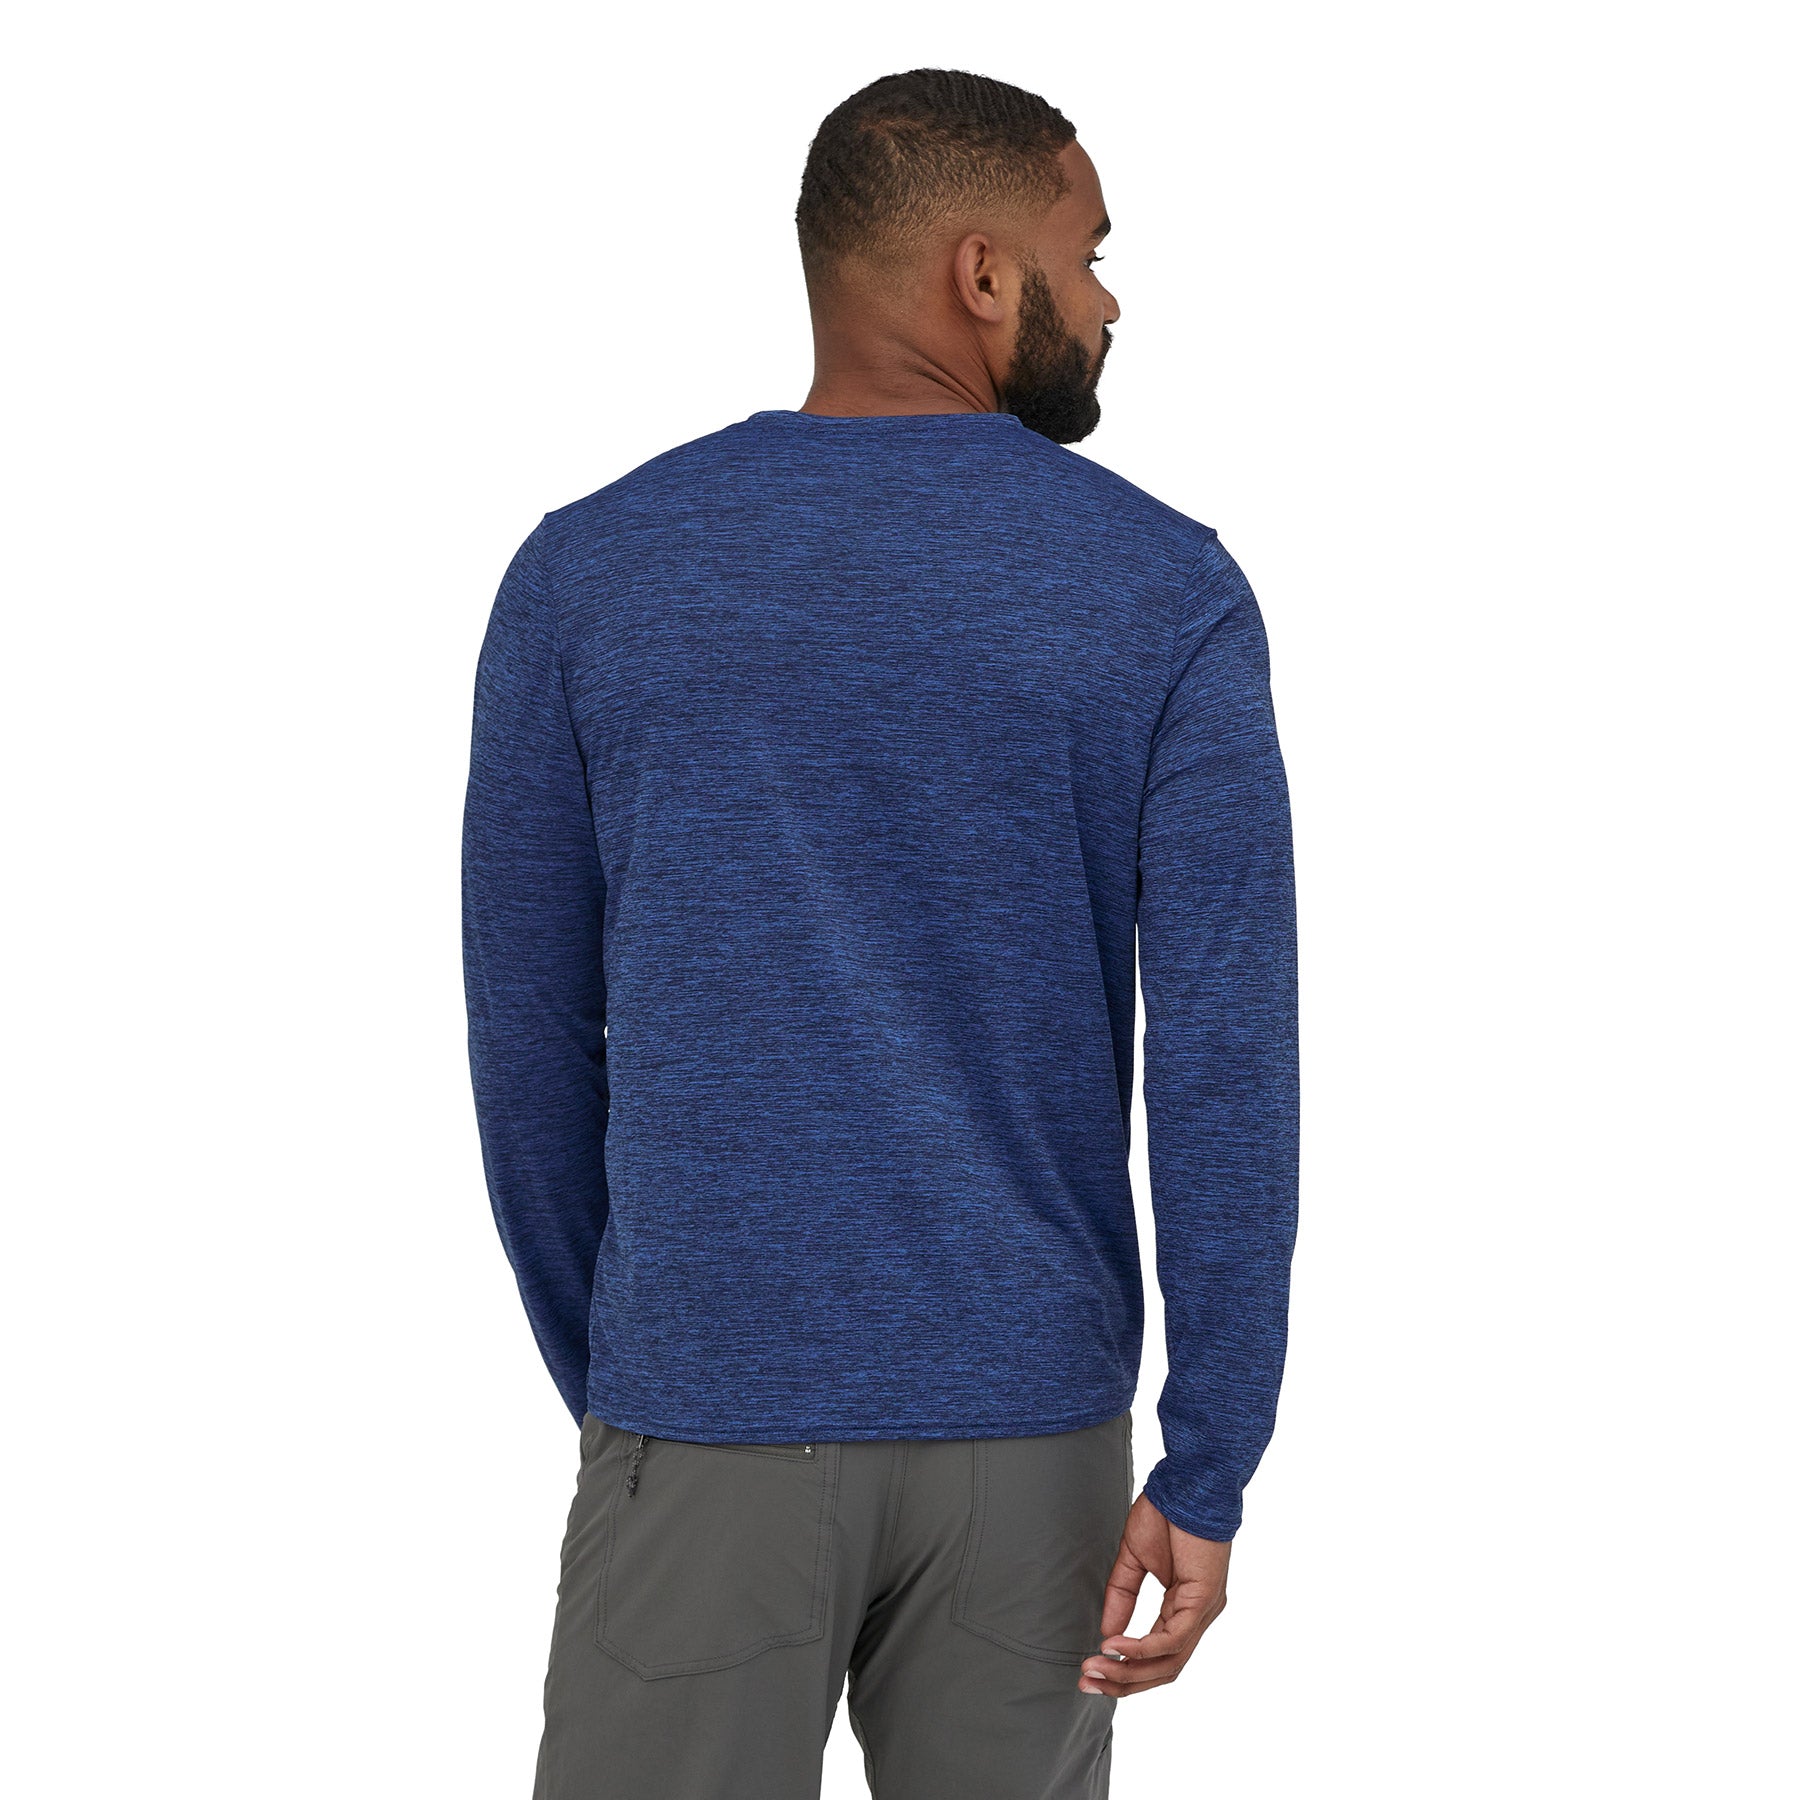 patagonia mens long sleeve capilene cool daily shirt in viking blue navy blue x dye on a model, back view